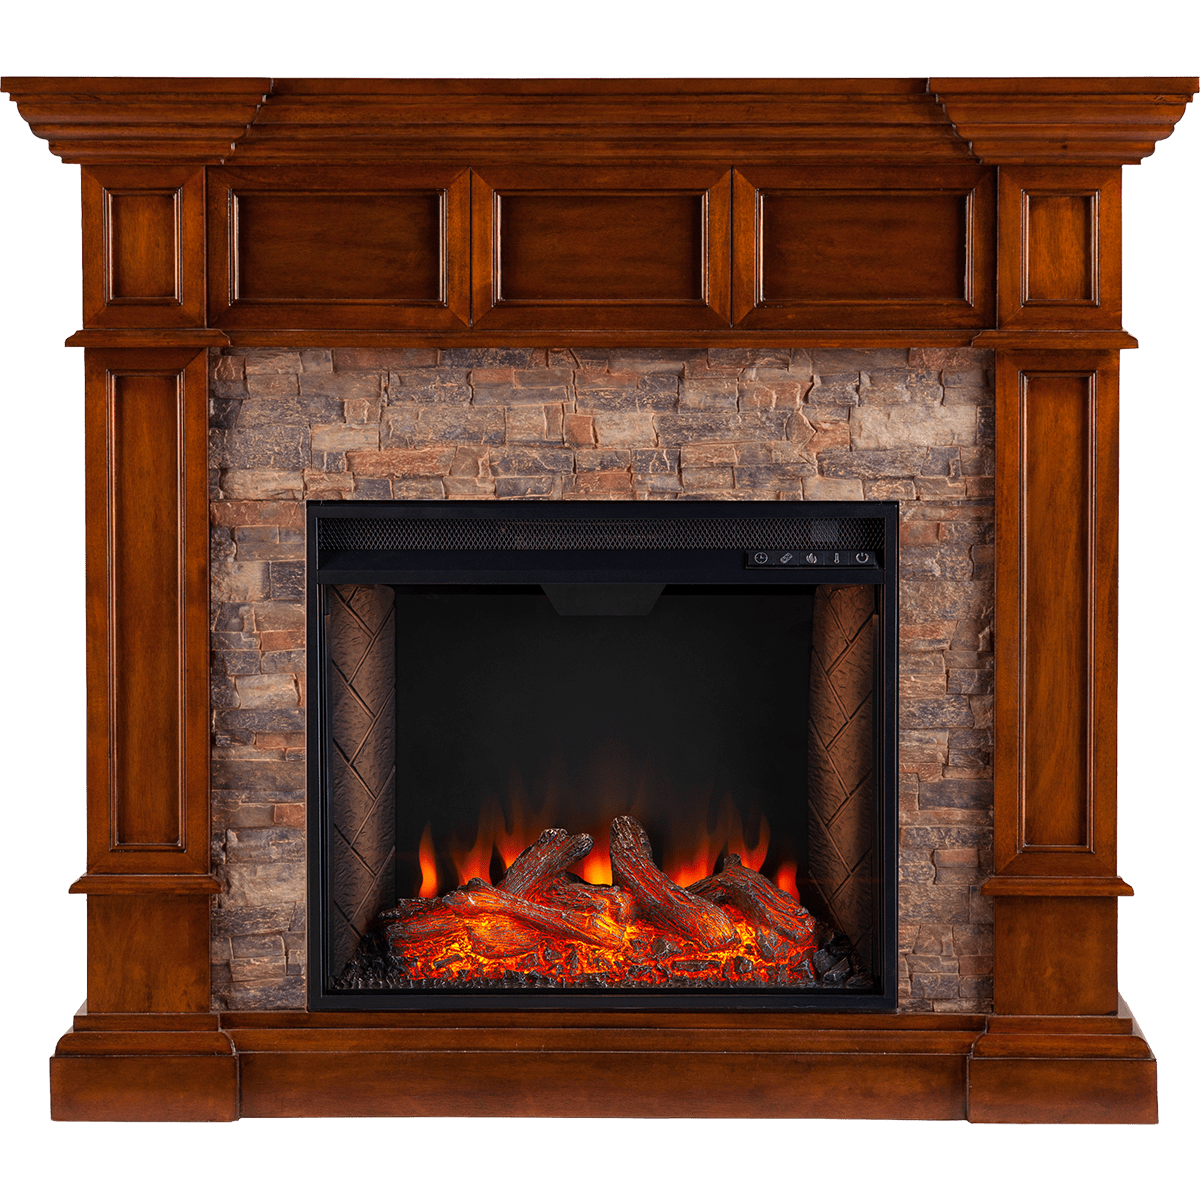 30 Inch Electric Fireplace Unique southern Enterprises Merrimack Simulated Stone Convertible Electric Fireplace